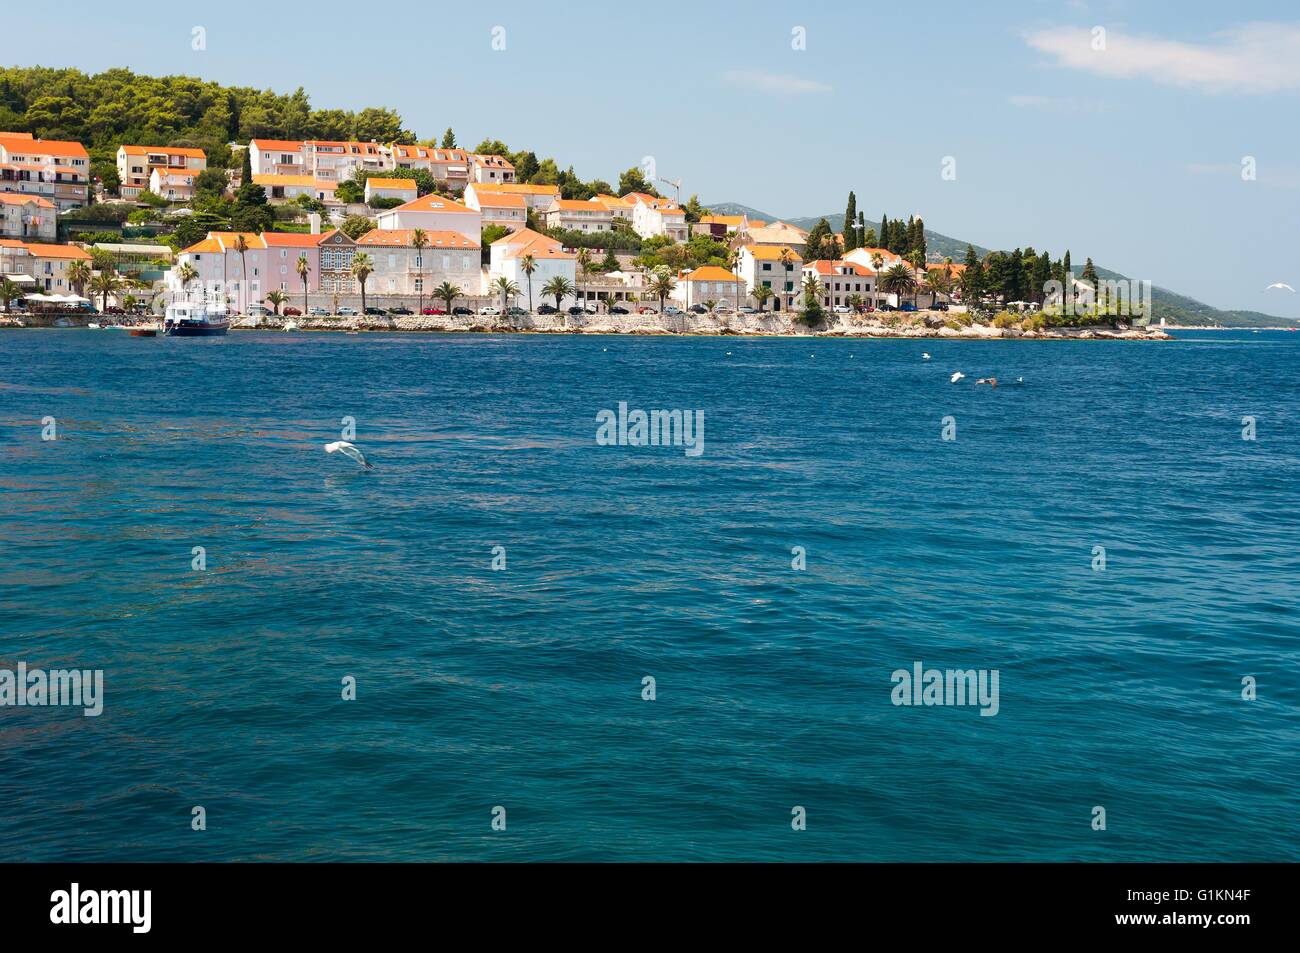 Town Korcula on island Korcula in Croatia. Korcula is known as the town in which Marco Polo was born. Stock Photo